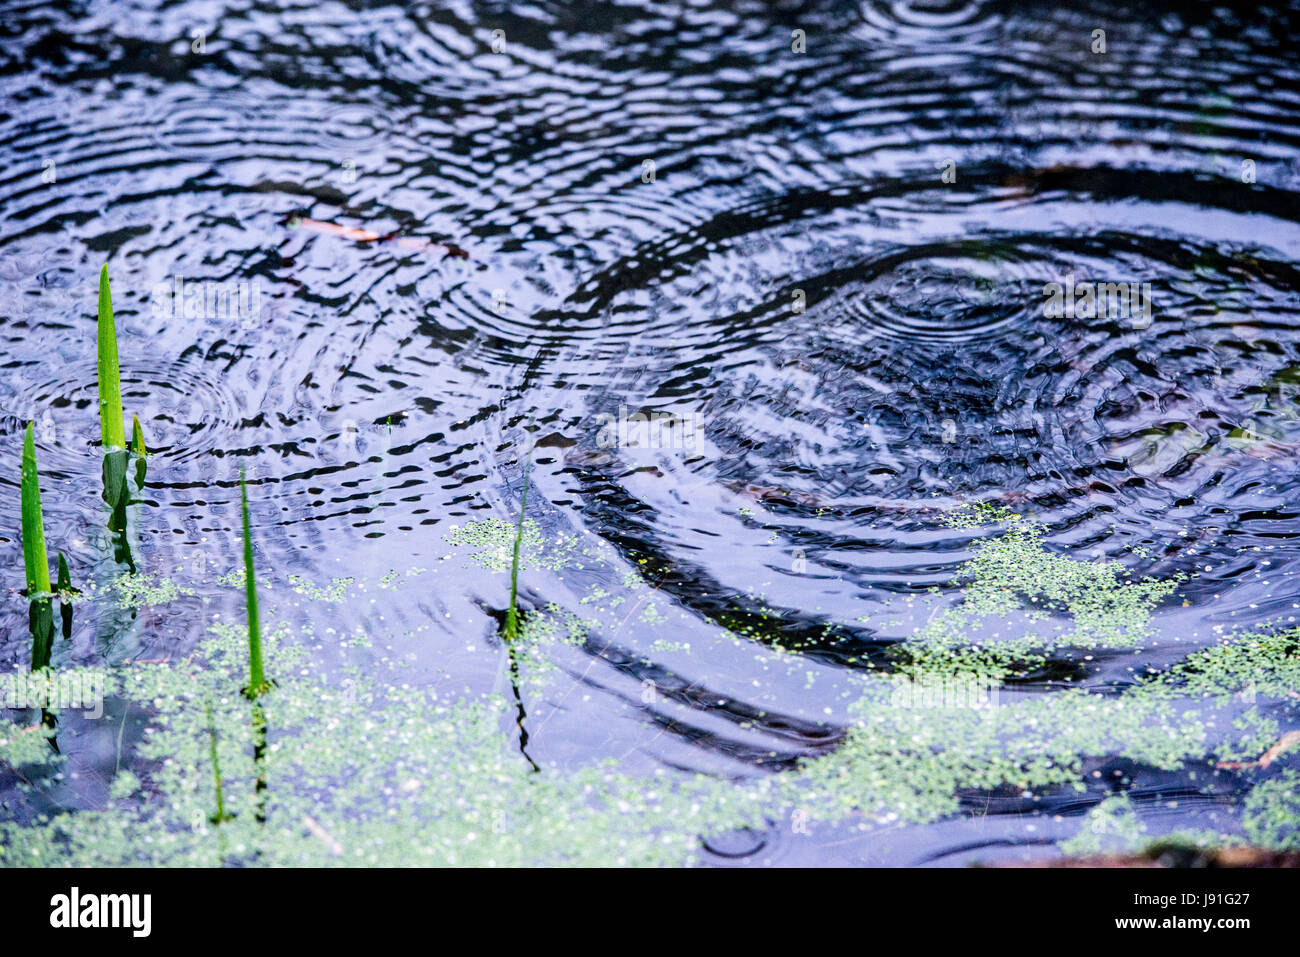 ripples from raindrops falling on pond Stock Photo